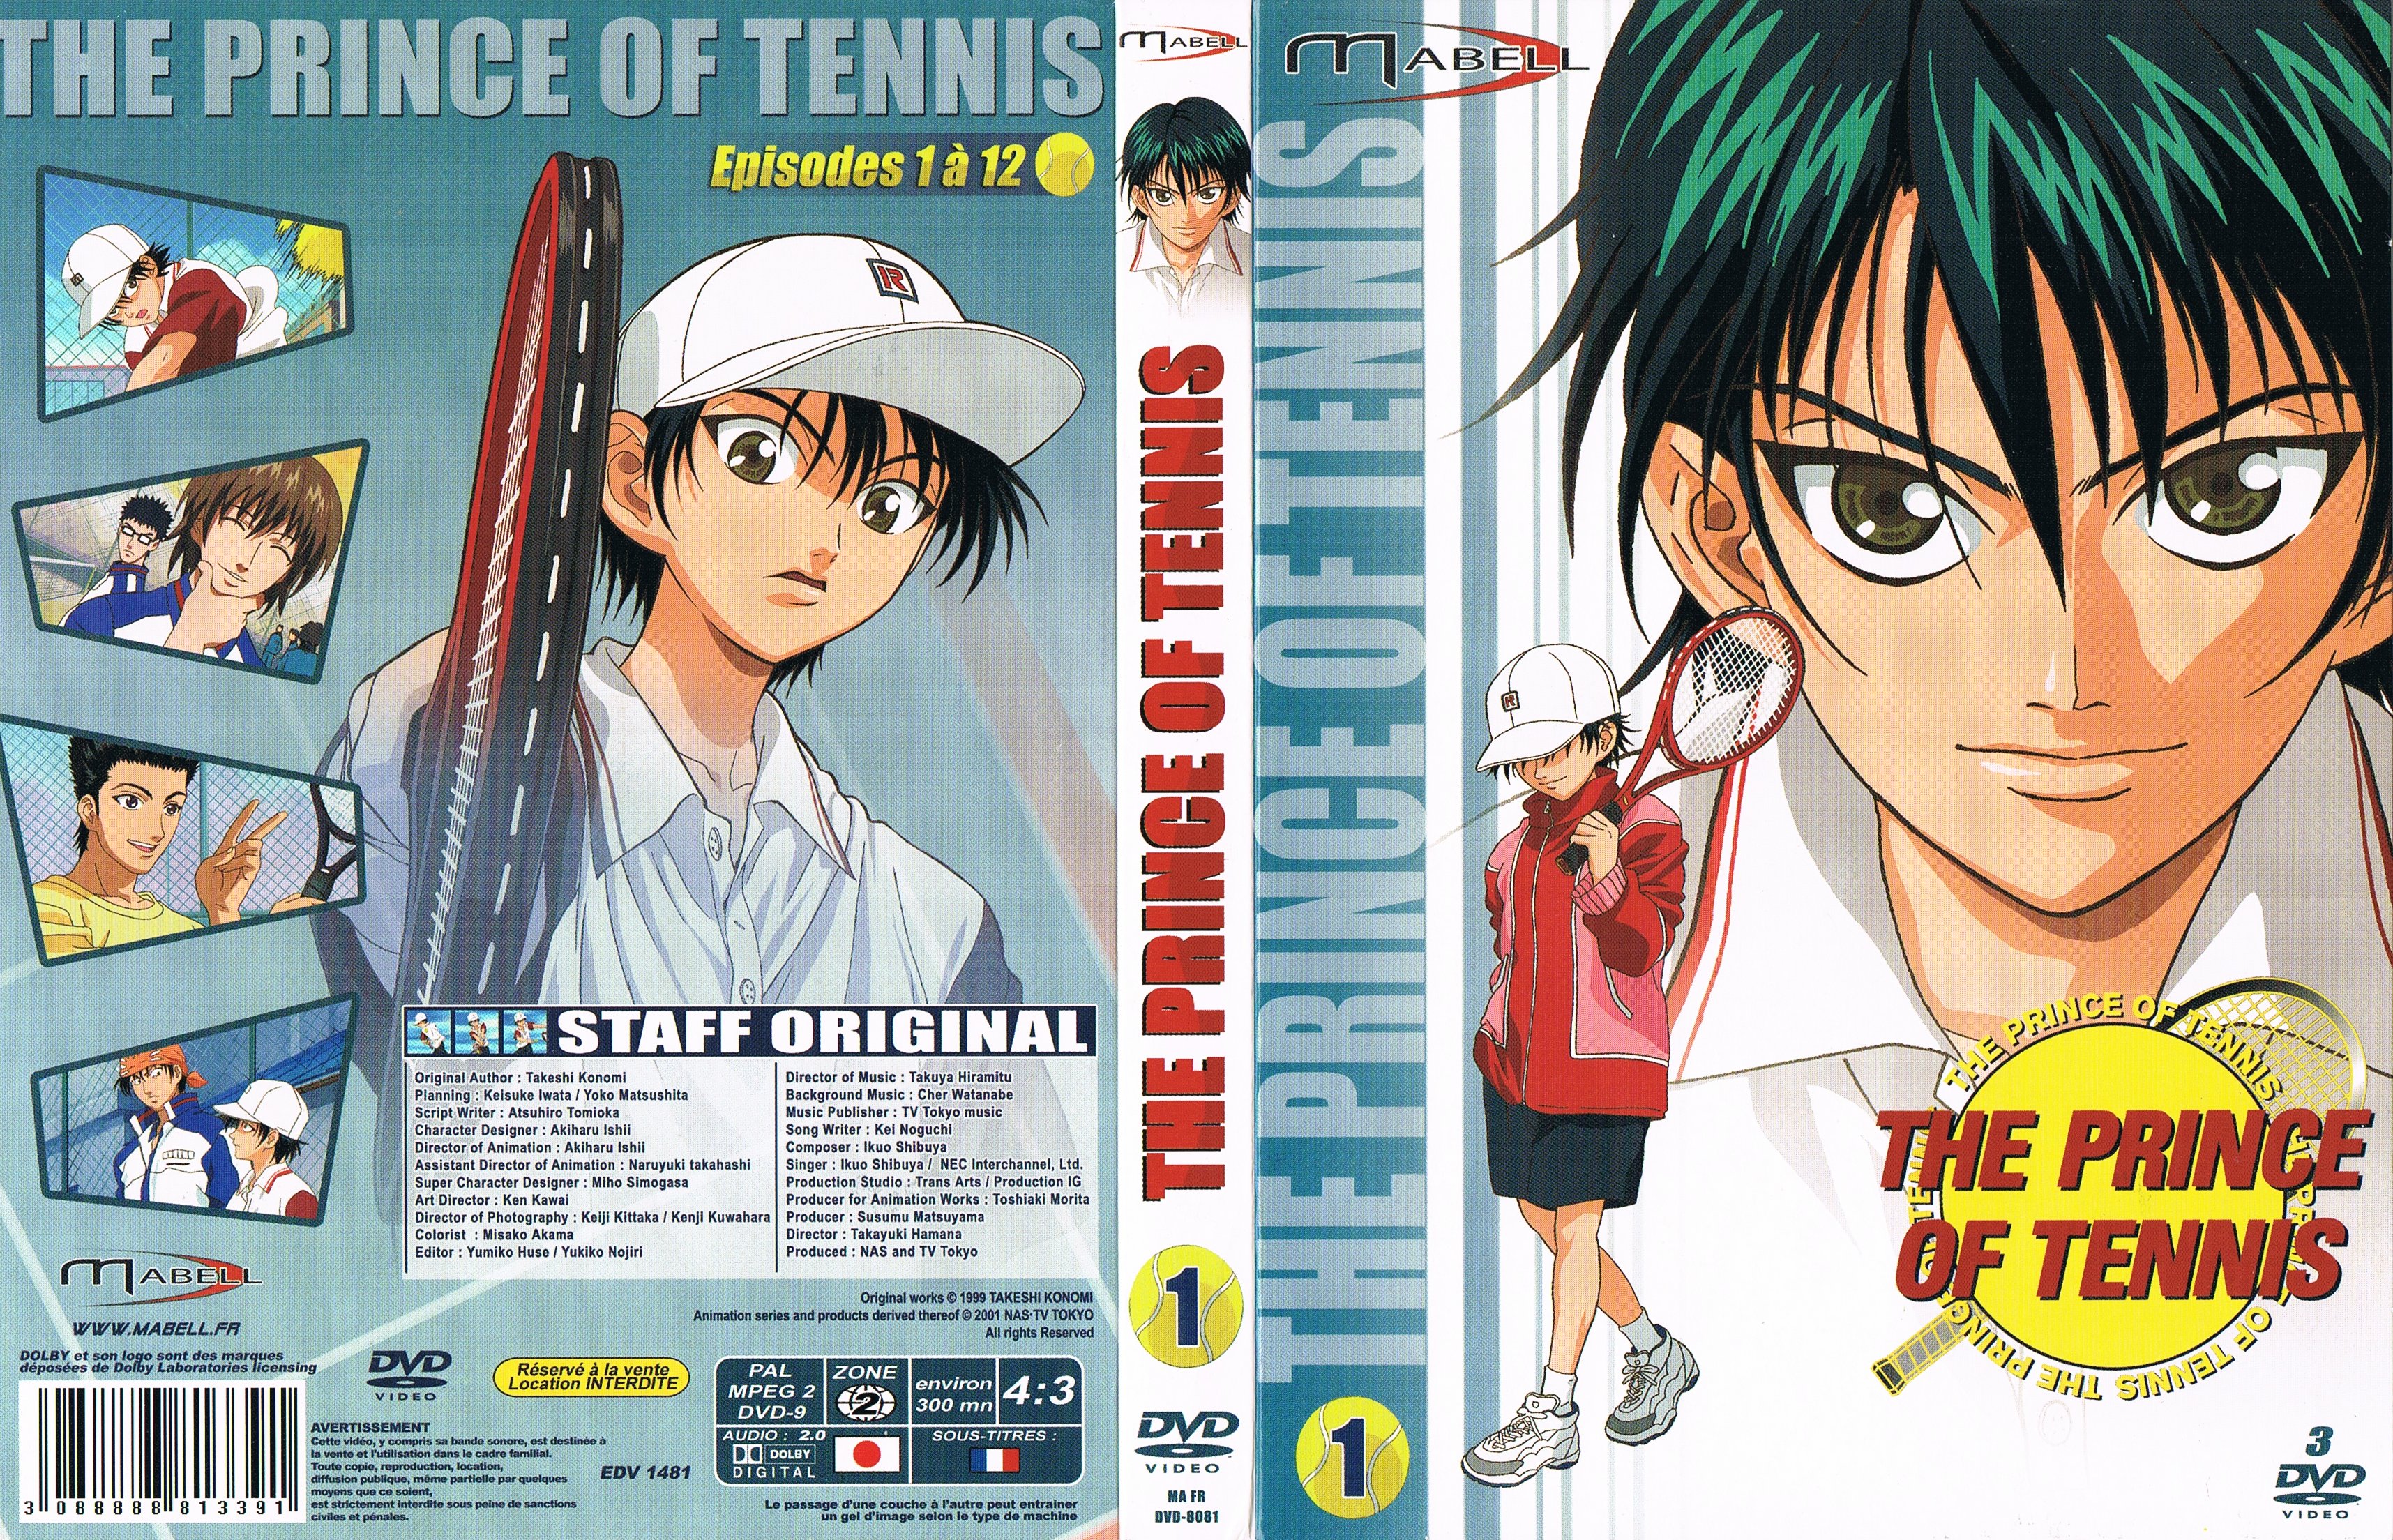 Jaquette DVD The Prince Of Tennis Vol 1